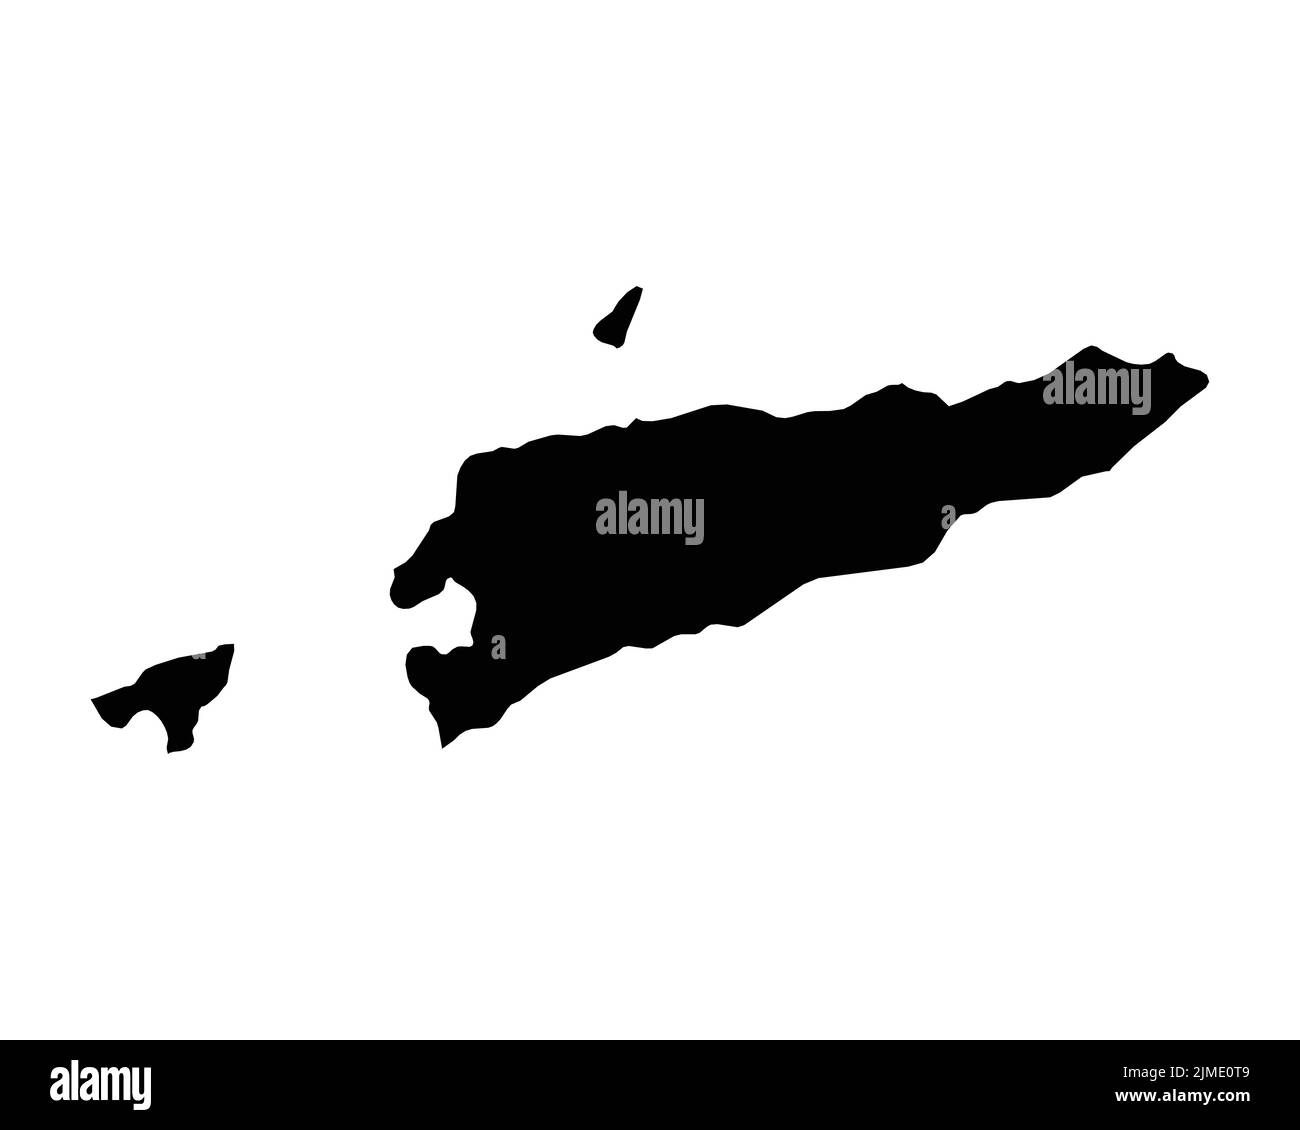 Timor-Leste Map. East Timor Country Map. Black and White East Timorese National Nation Geography Outline Border Boundary Territory Shape Vector Illust Stock Vector